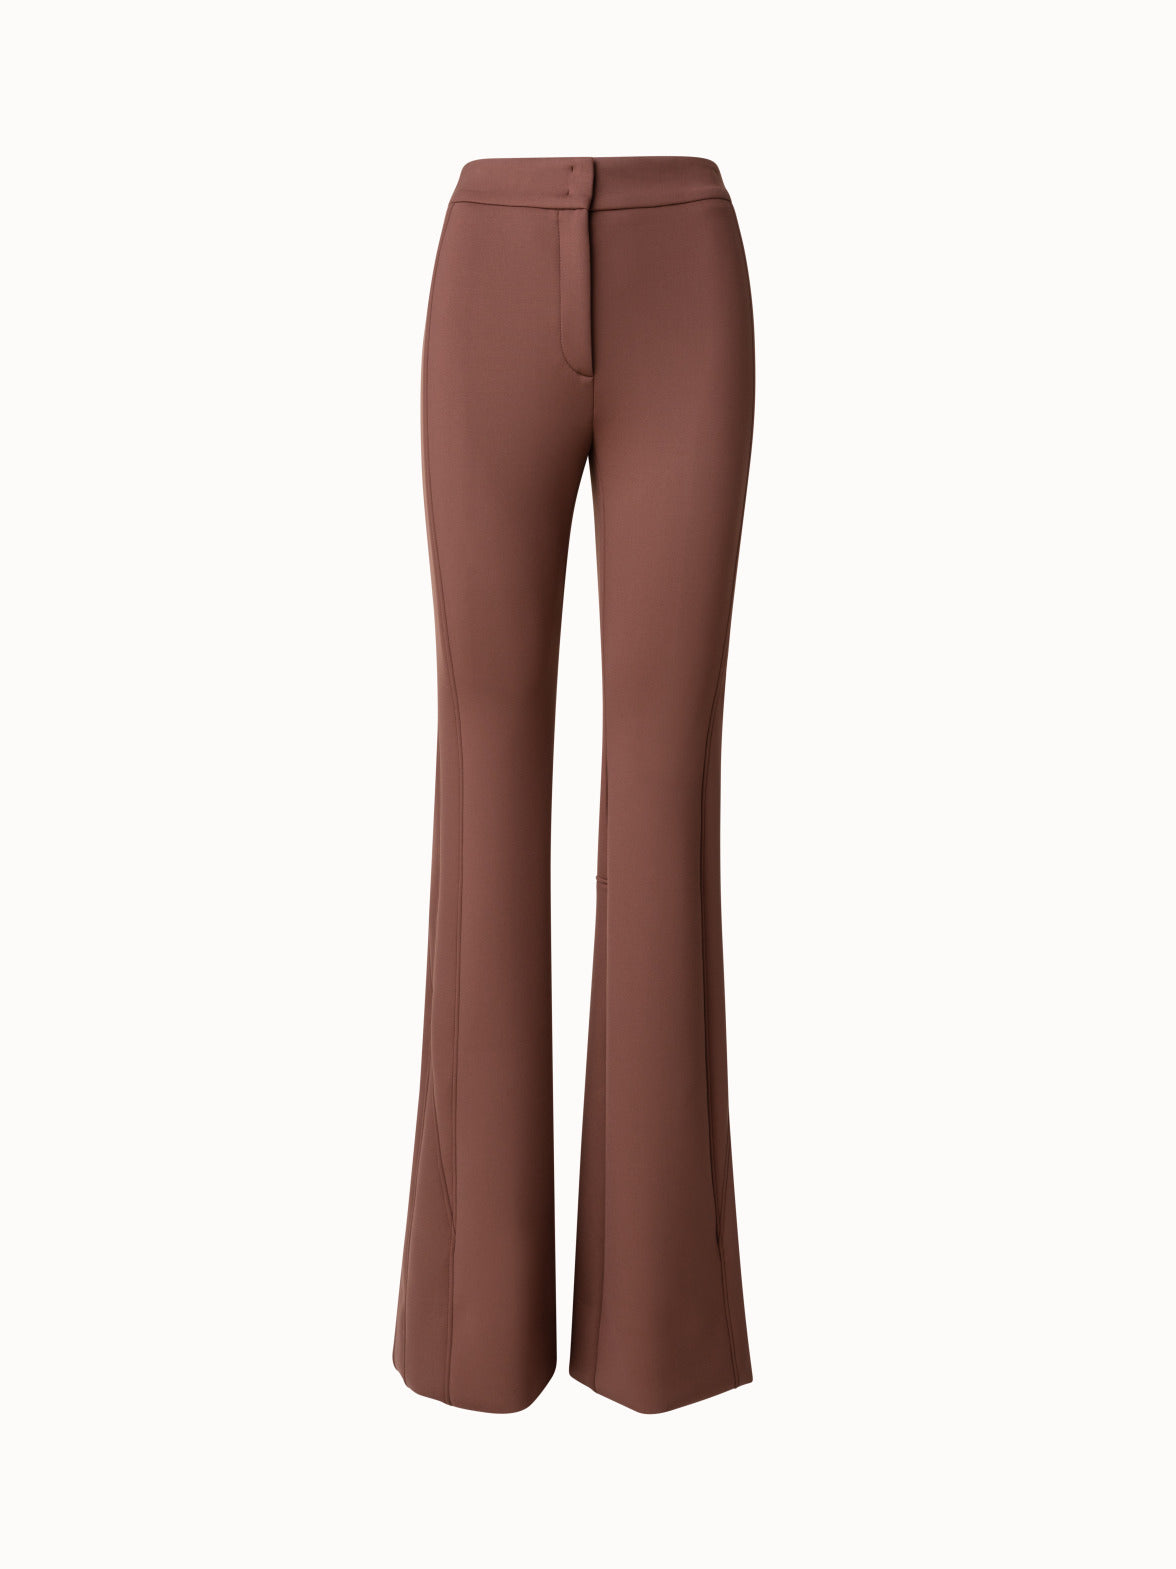 Brown Flared & Bootcut Jeans for Women